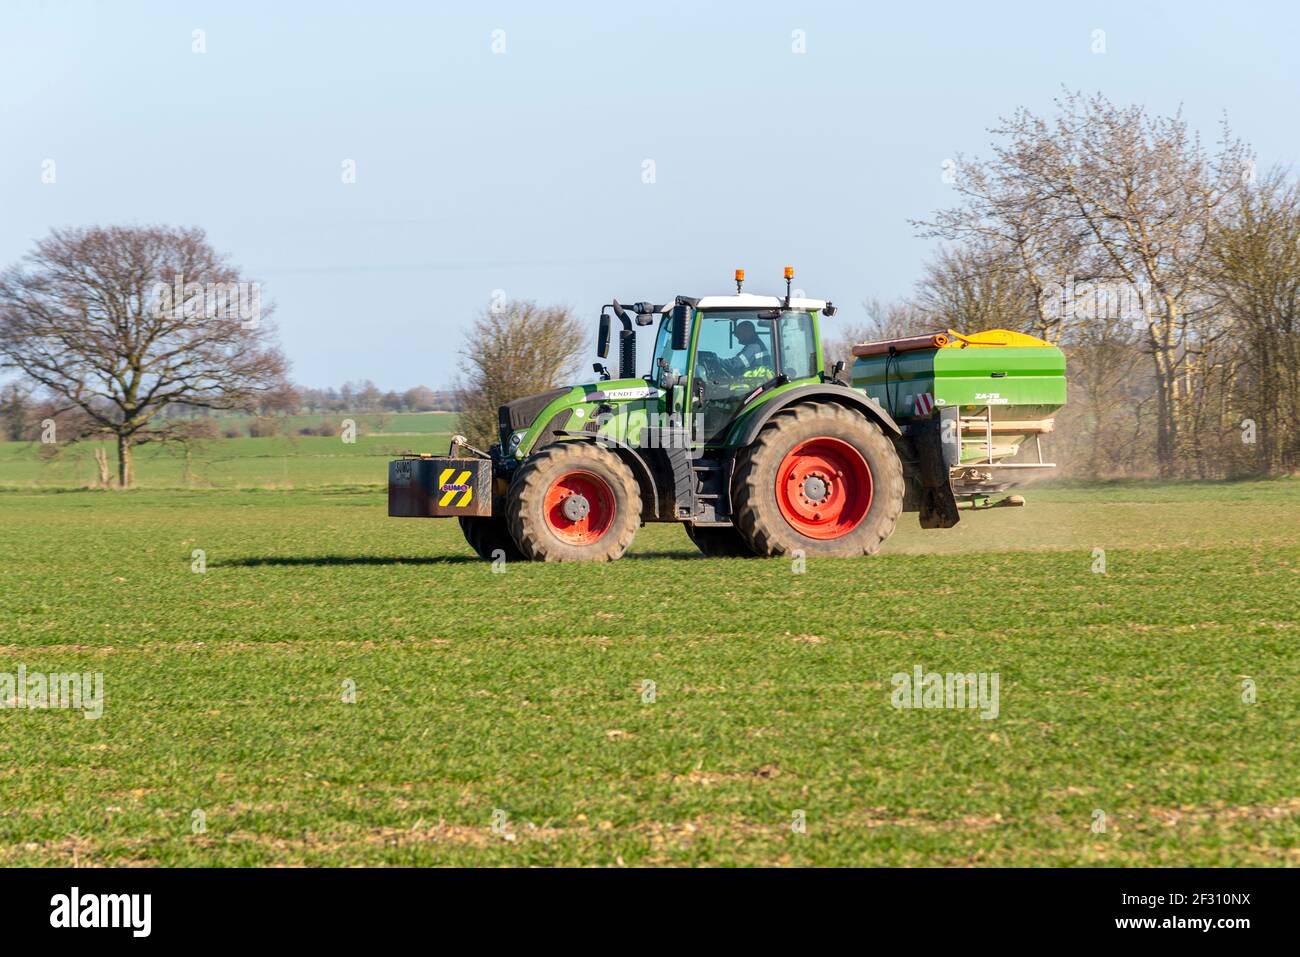 Tractor in Canewdon, Essex, UK. Fendt 724 Vario with ZA-TS 4200 litre mounted spreader. Spreading fertiliser on young crops in field. Agriculture Stock Photo